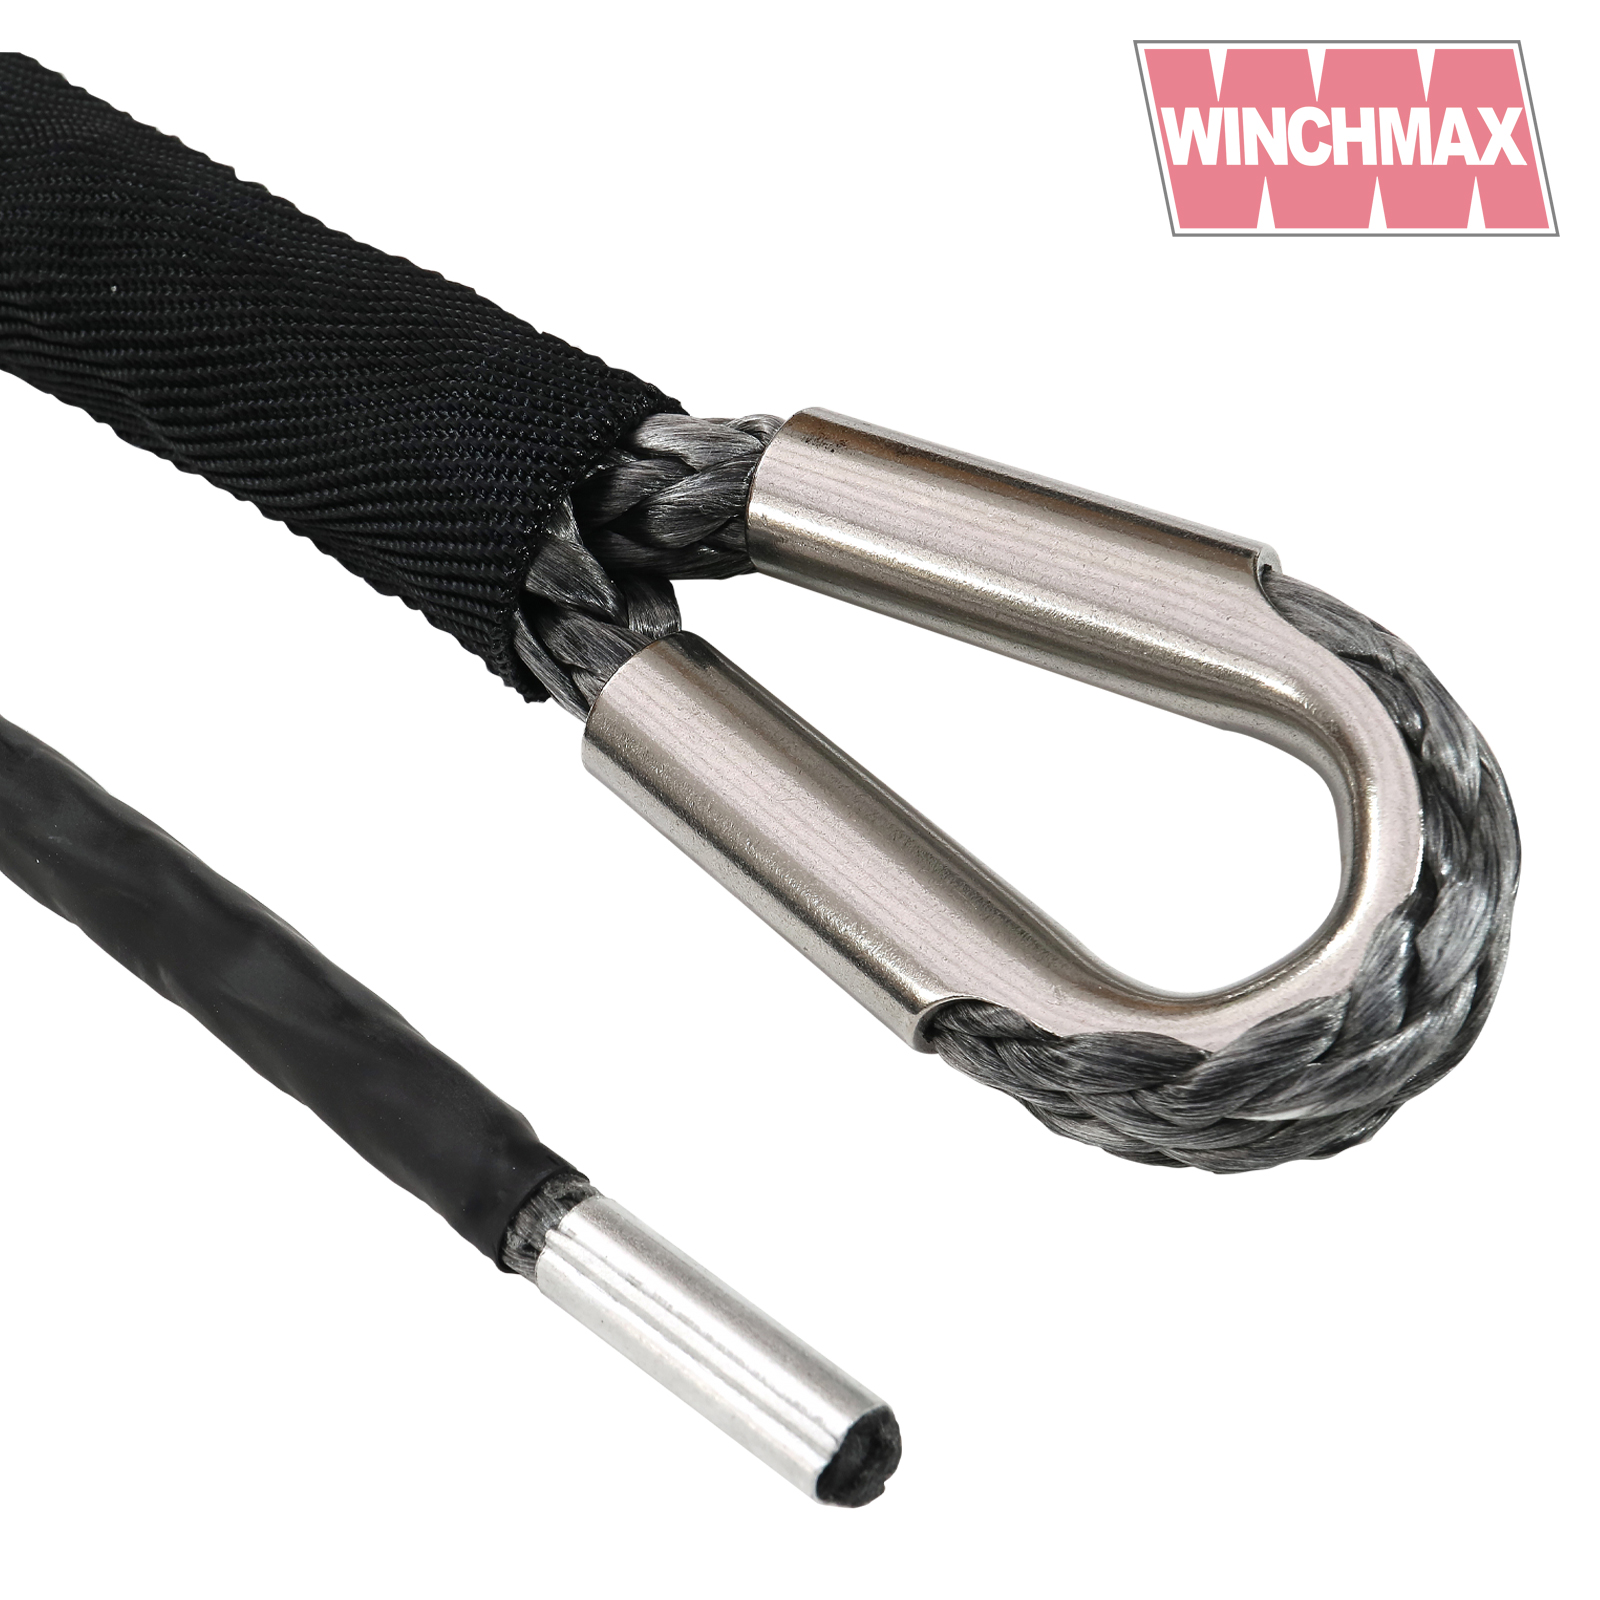 Armourline Synthetic Rope 25m x 10mm, Hole Fix. 3/8 Inch Tactical Hook. -  Winchmax